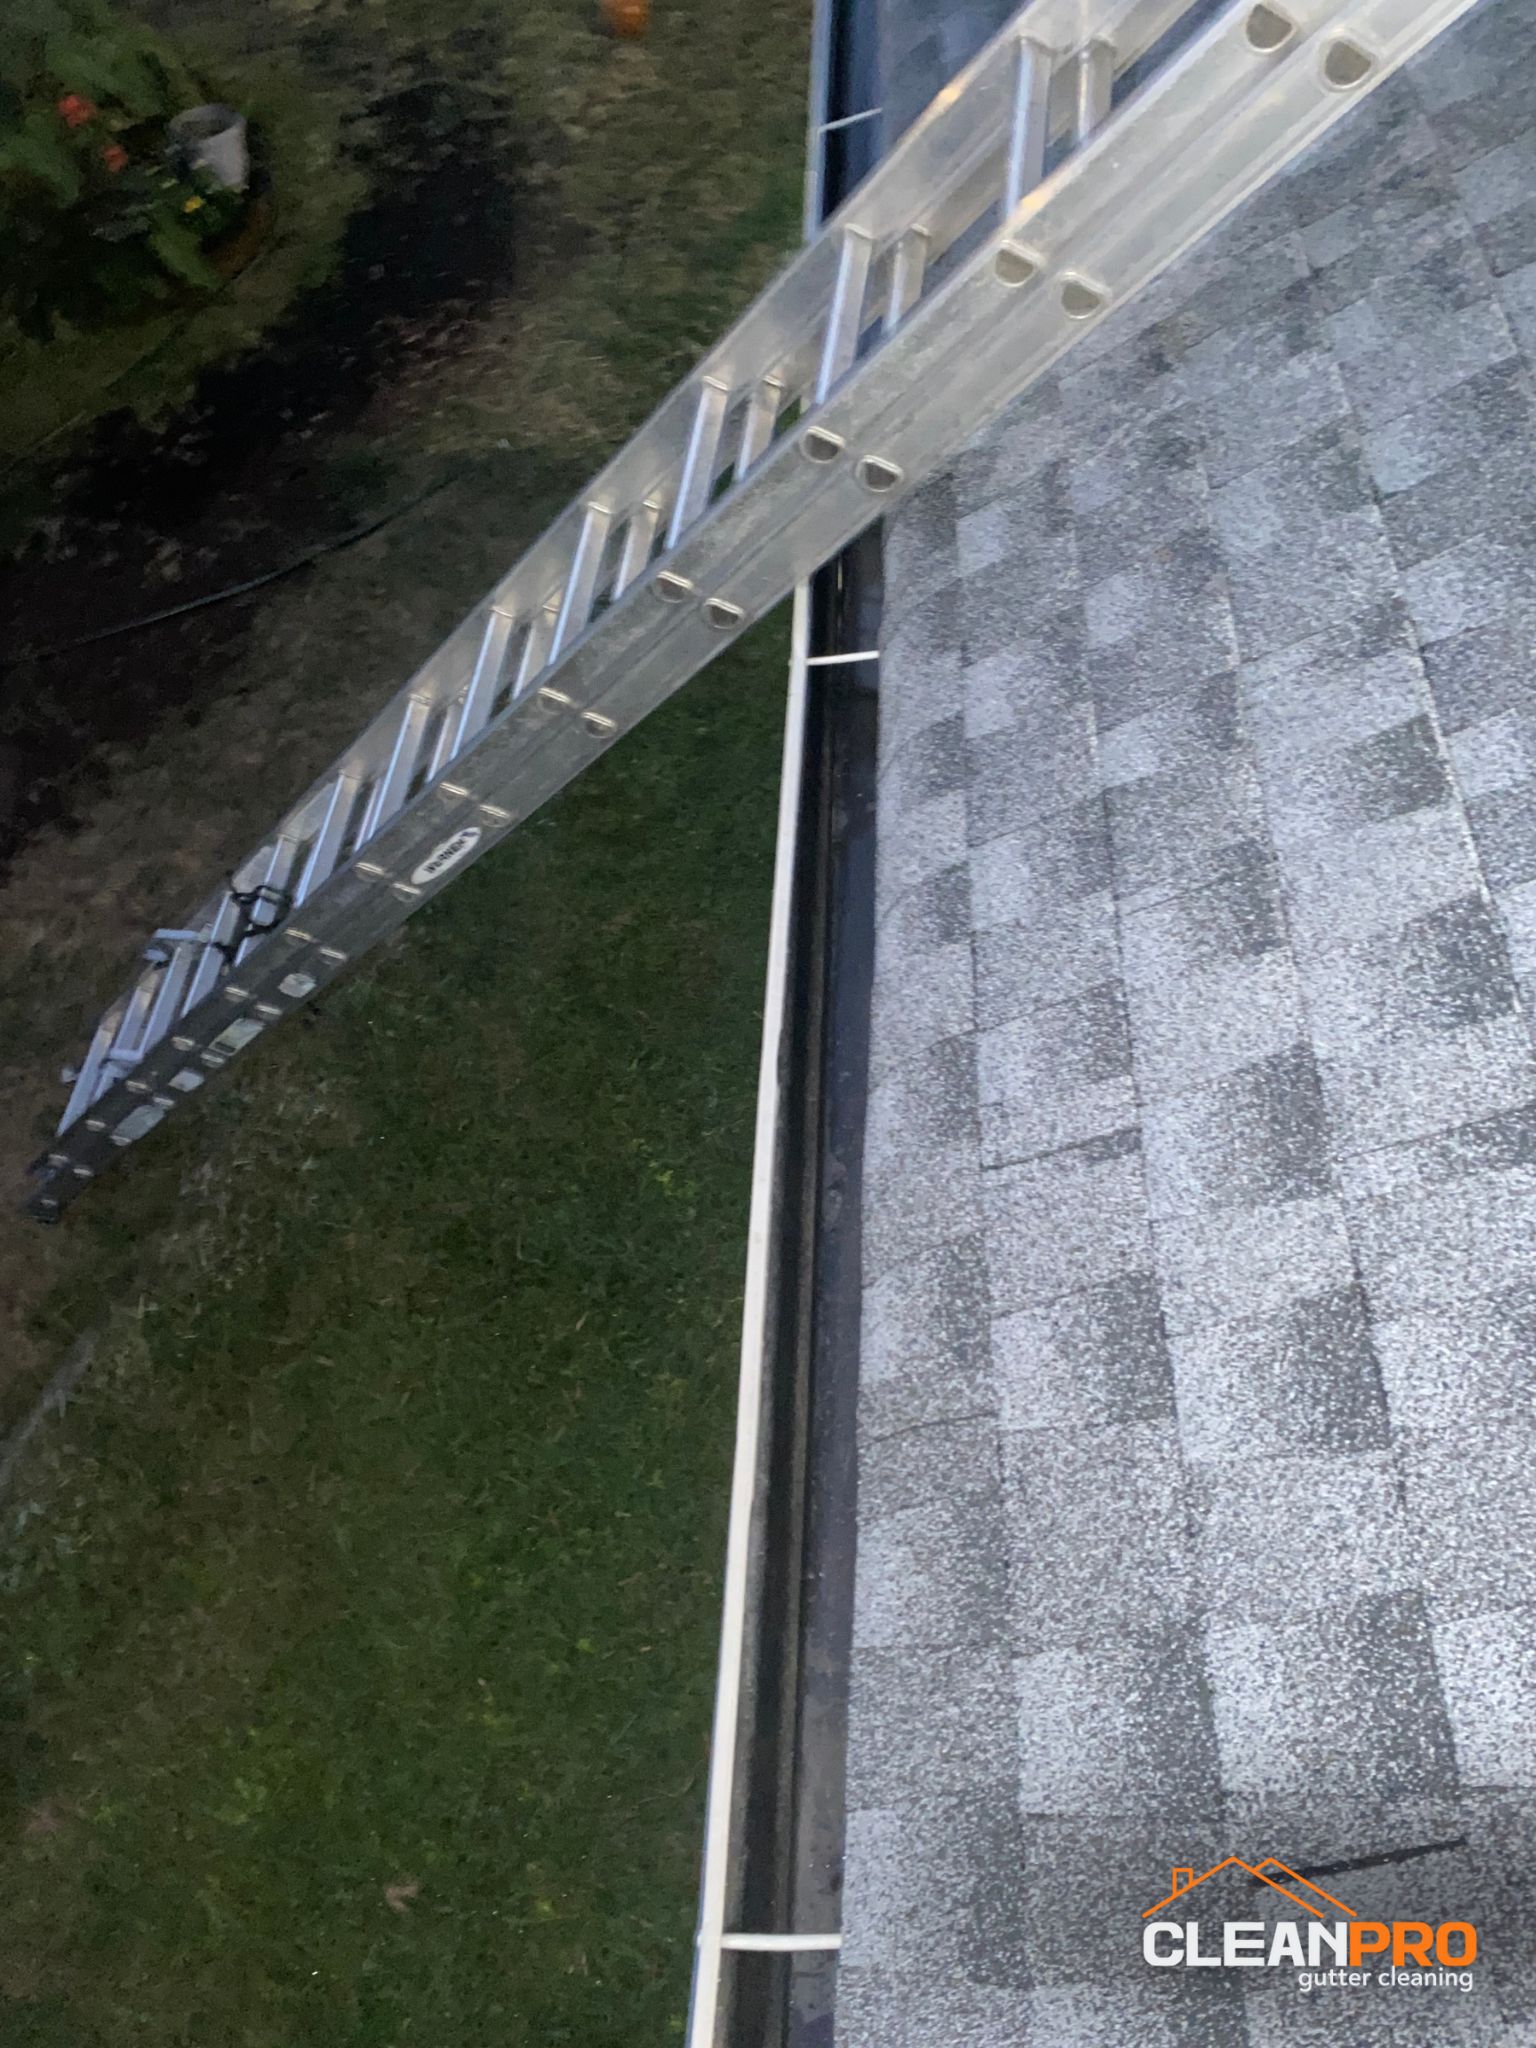 Residential Gutter Cleaning in Lawrence KS